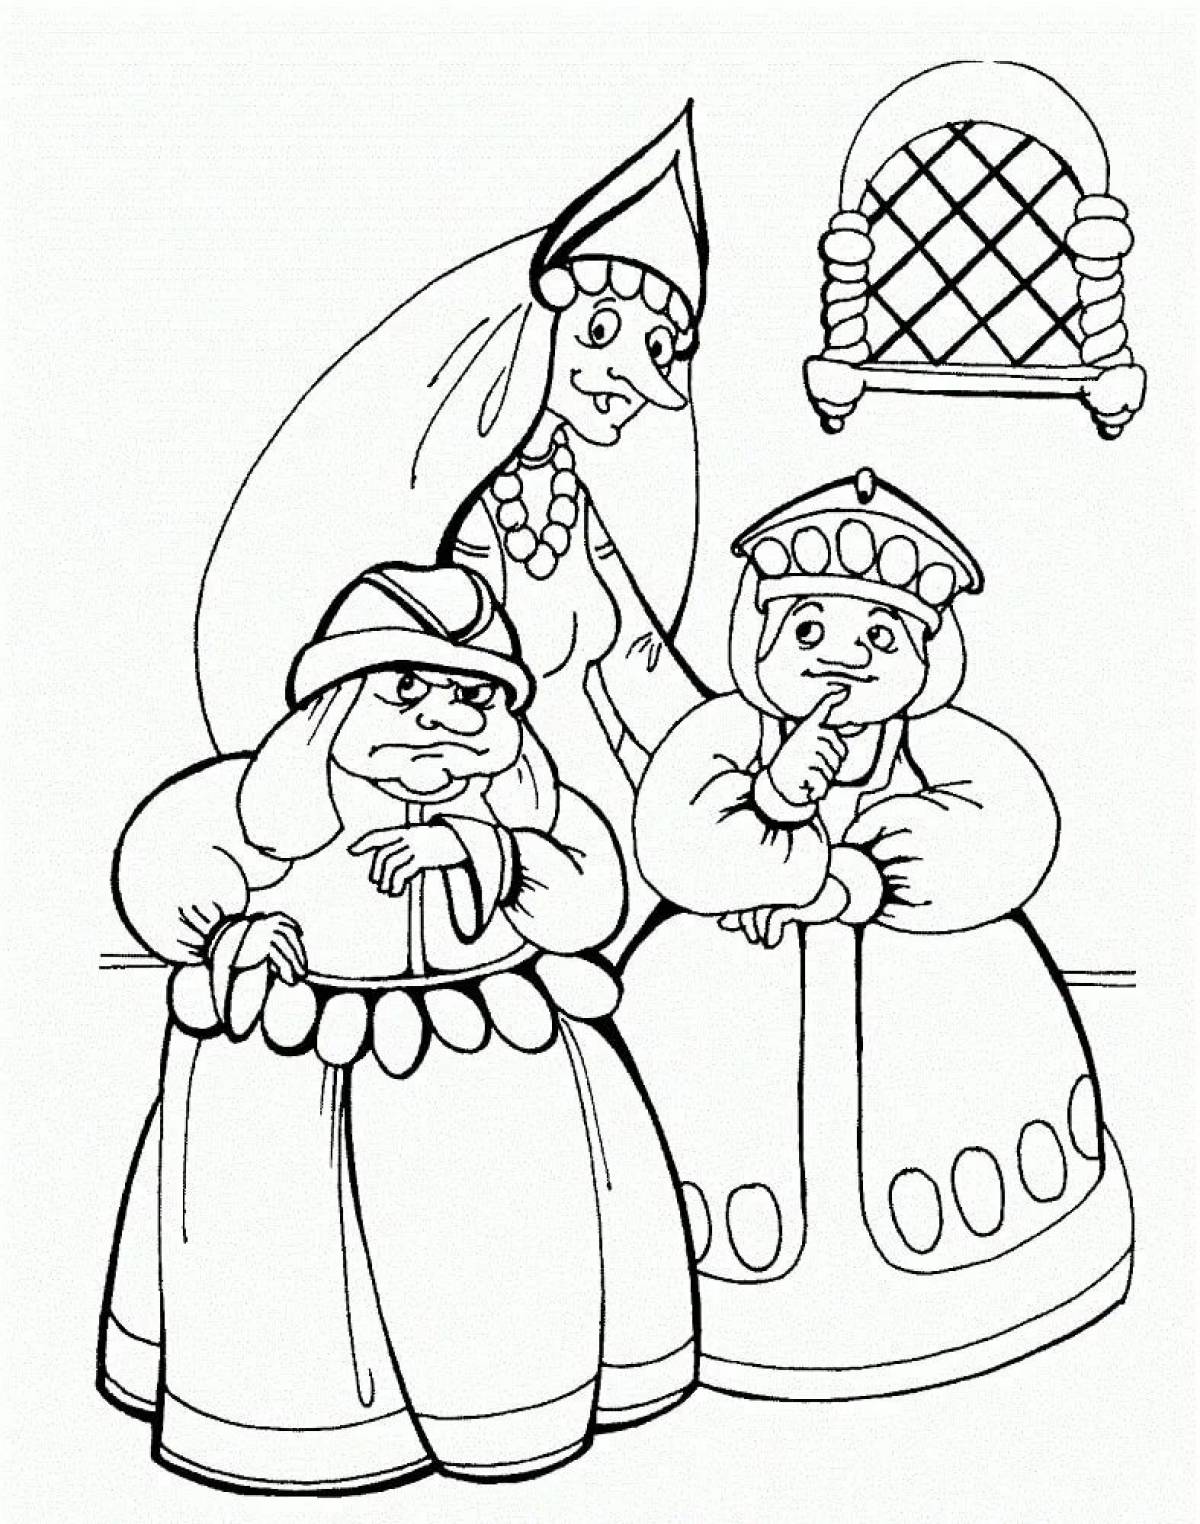 Illustration for the fairy tale about Tsar Saltan Grade 3 #1